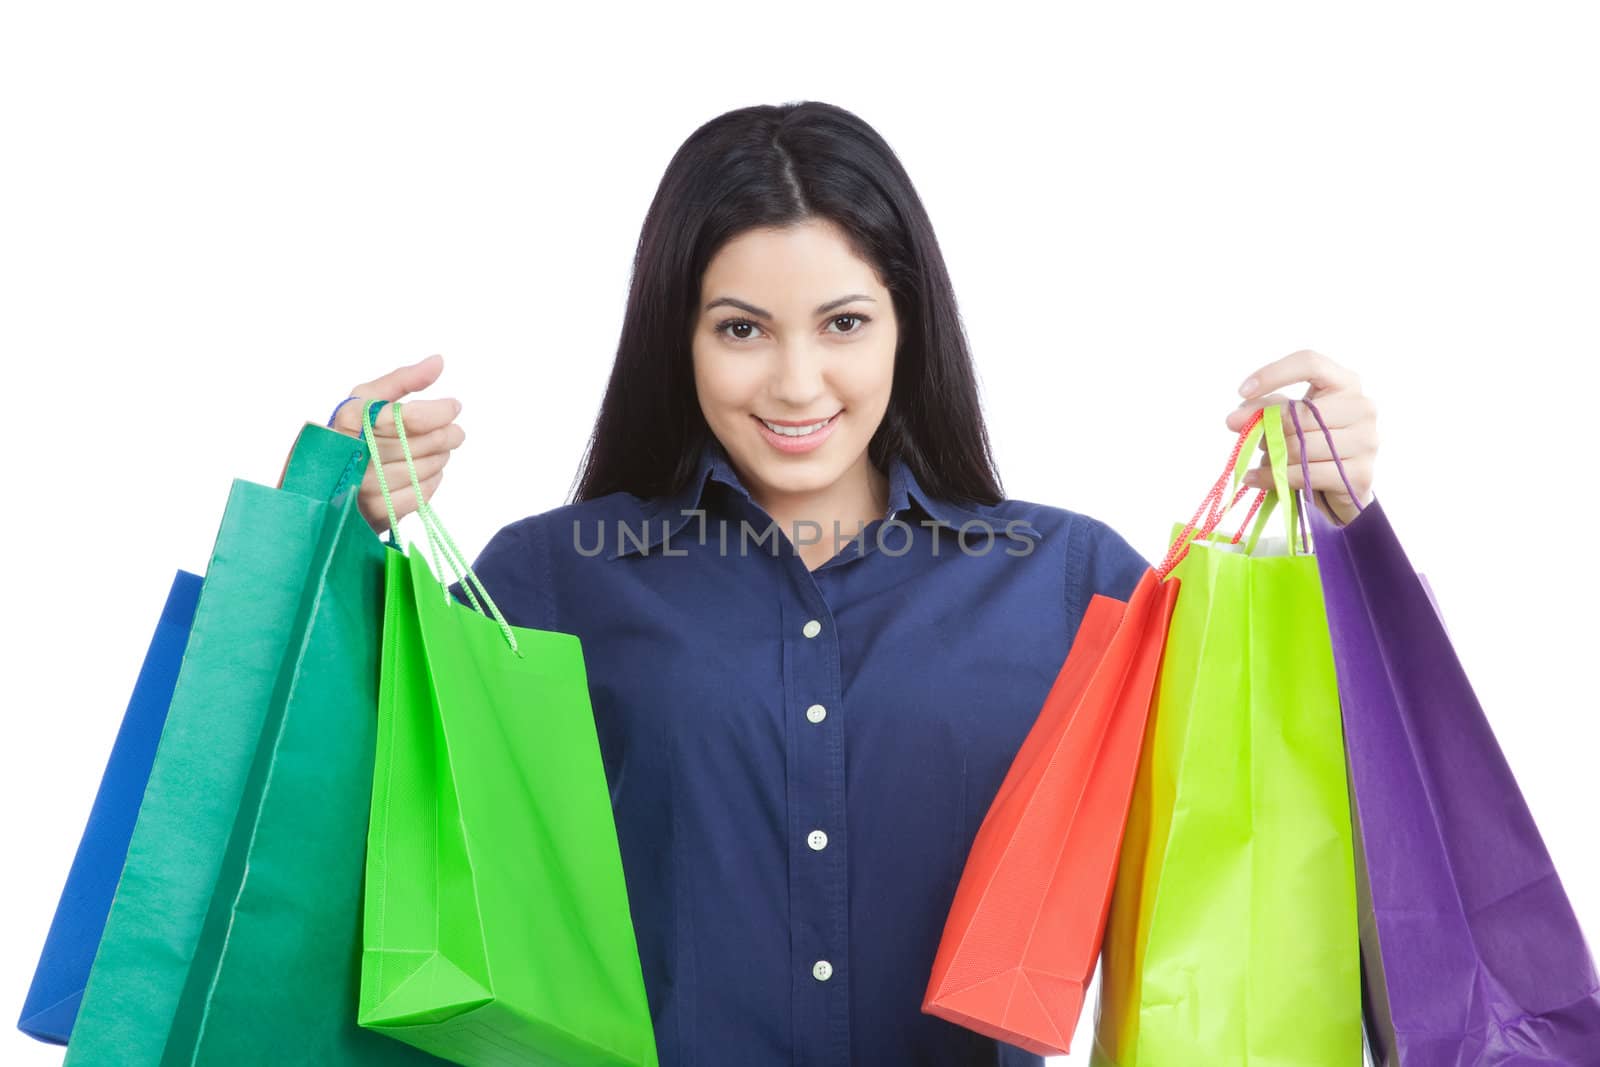 Close-up of happy young woman holding shopping bags isolated on white background.